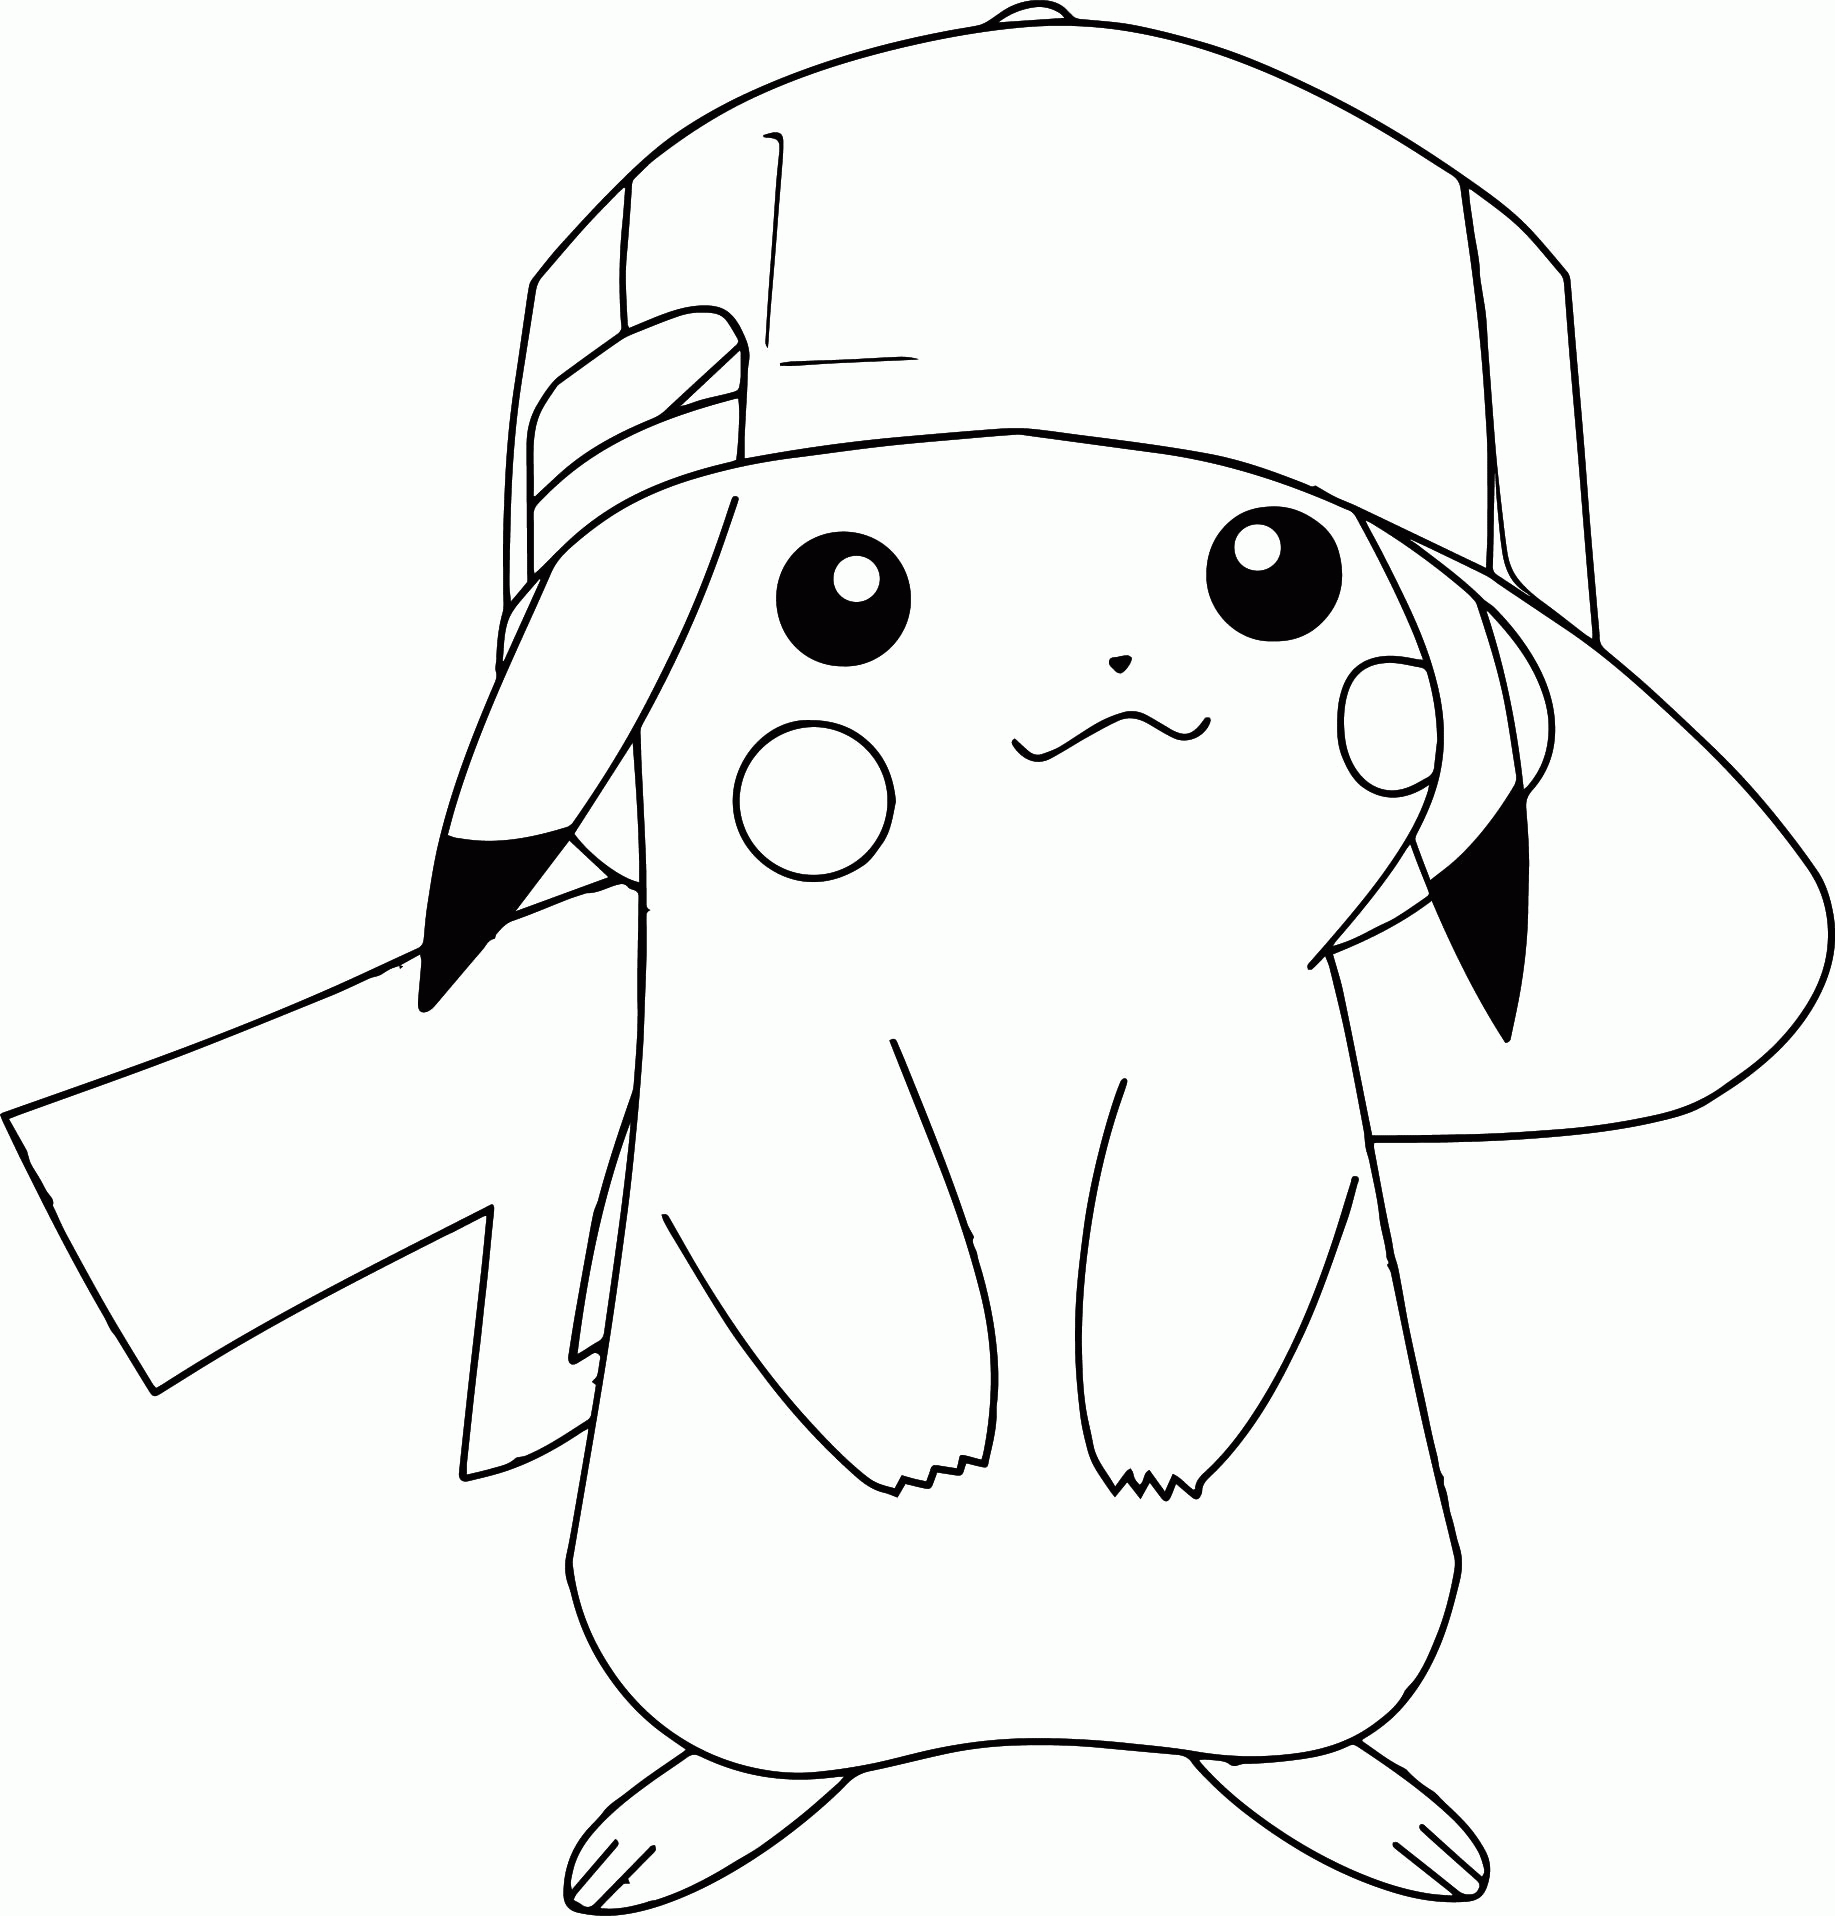 Pokemon Pikachu Coloring Sheets High Quality Coloring Pages